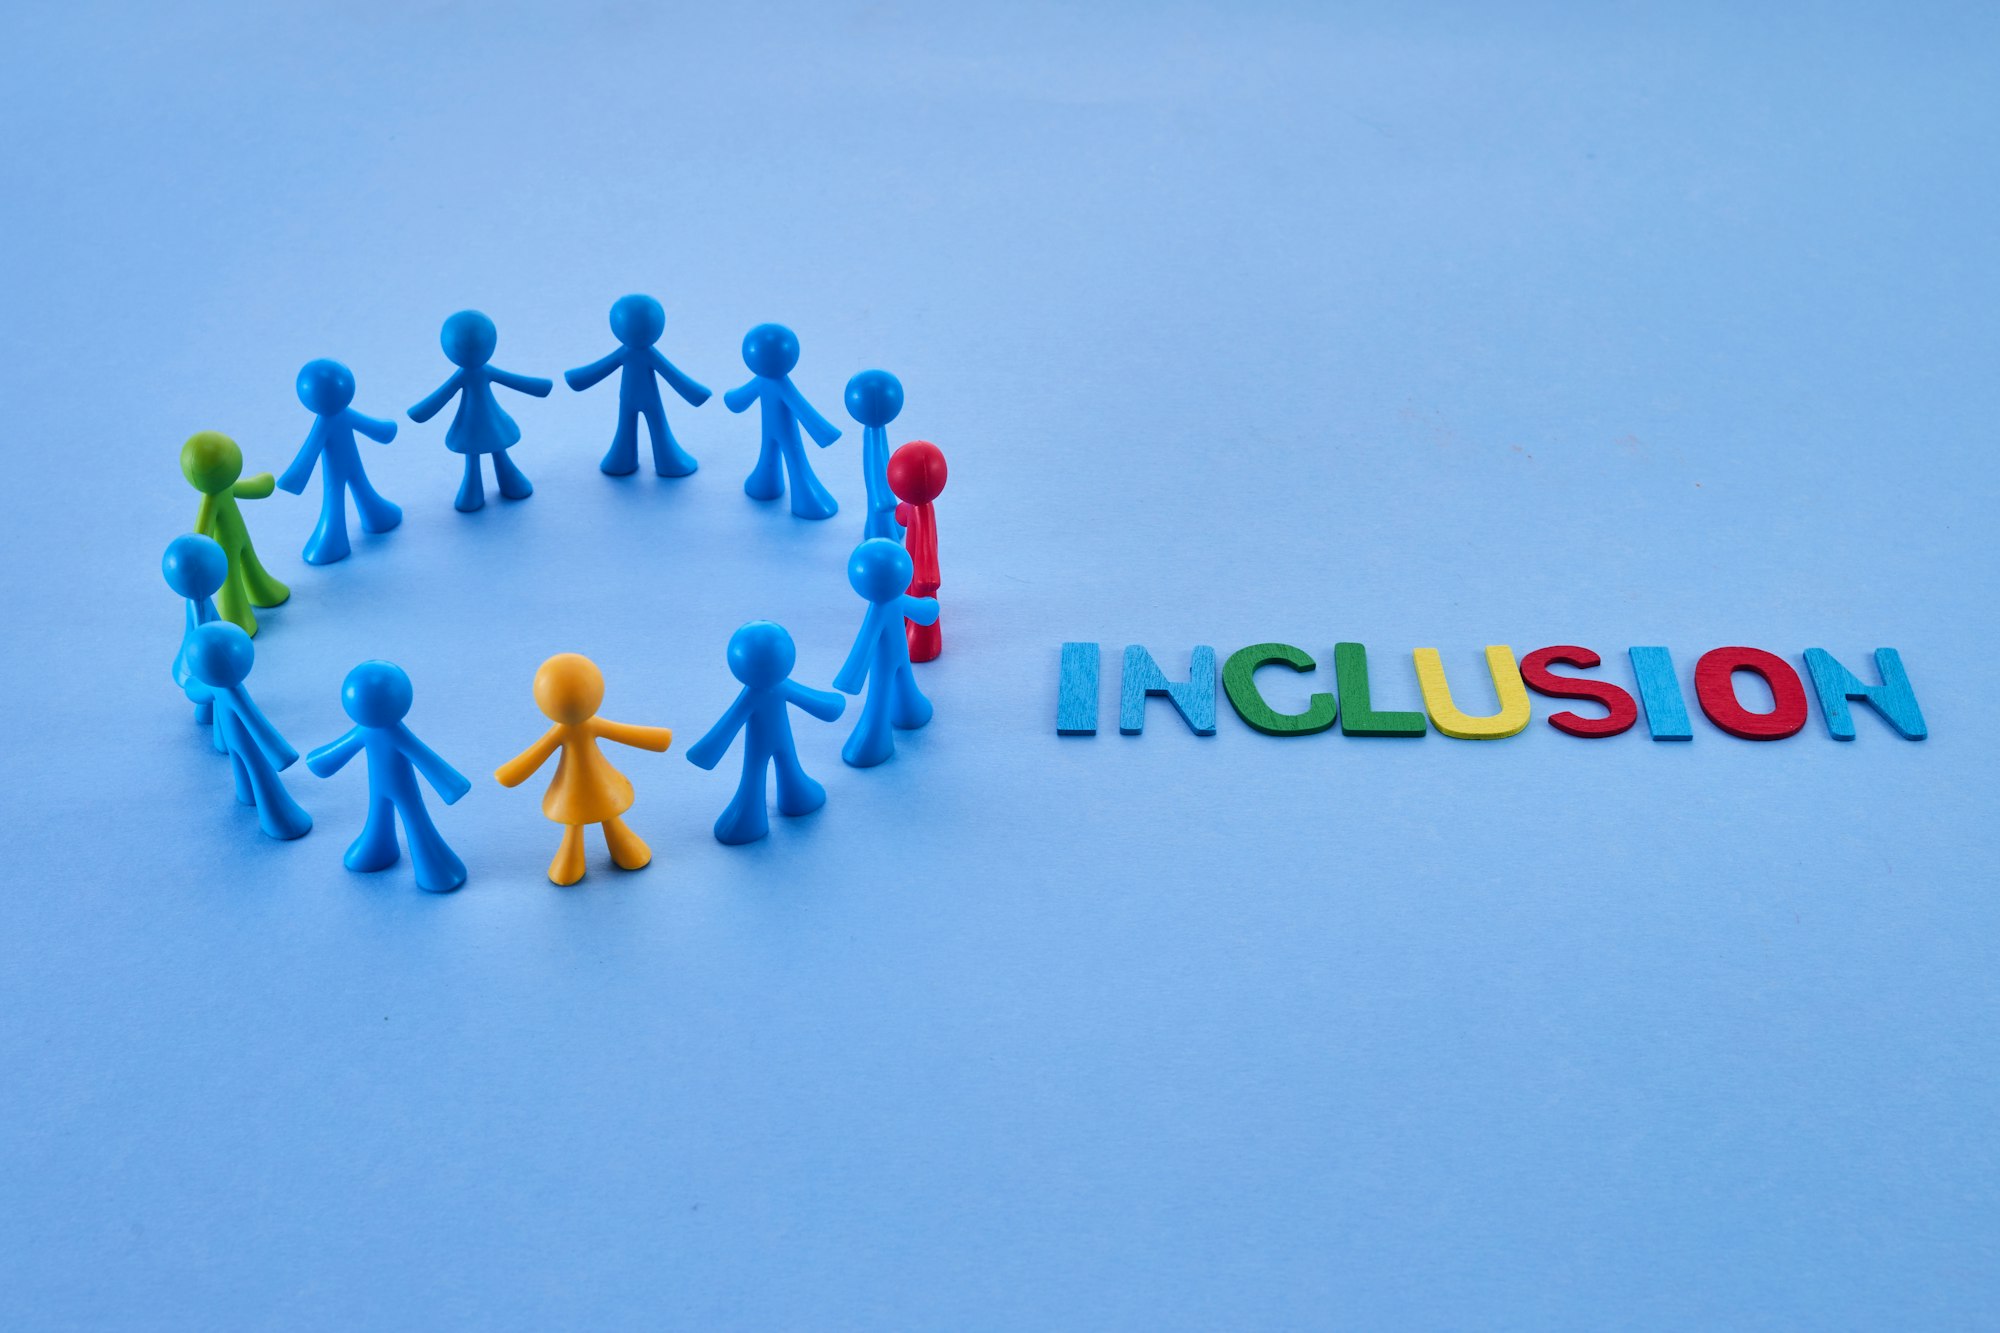 Diversity and inclusion concept. Colorful figurines on blue background